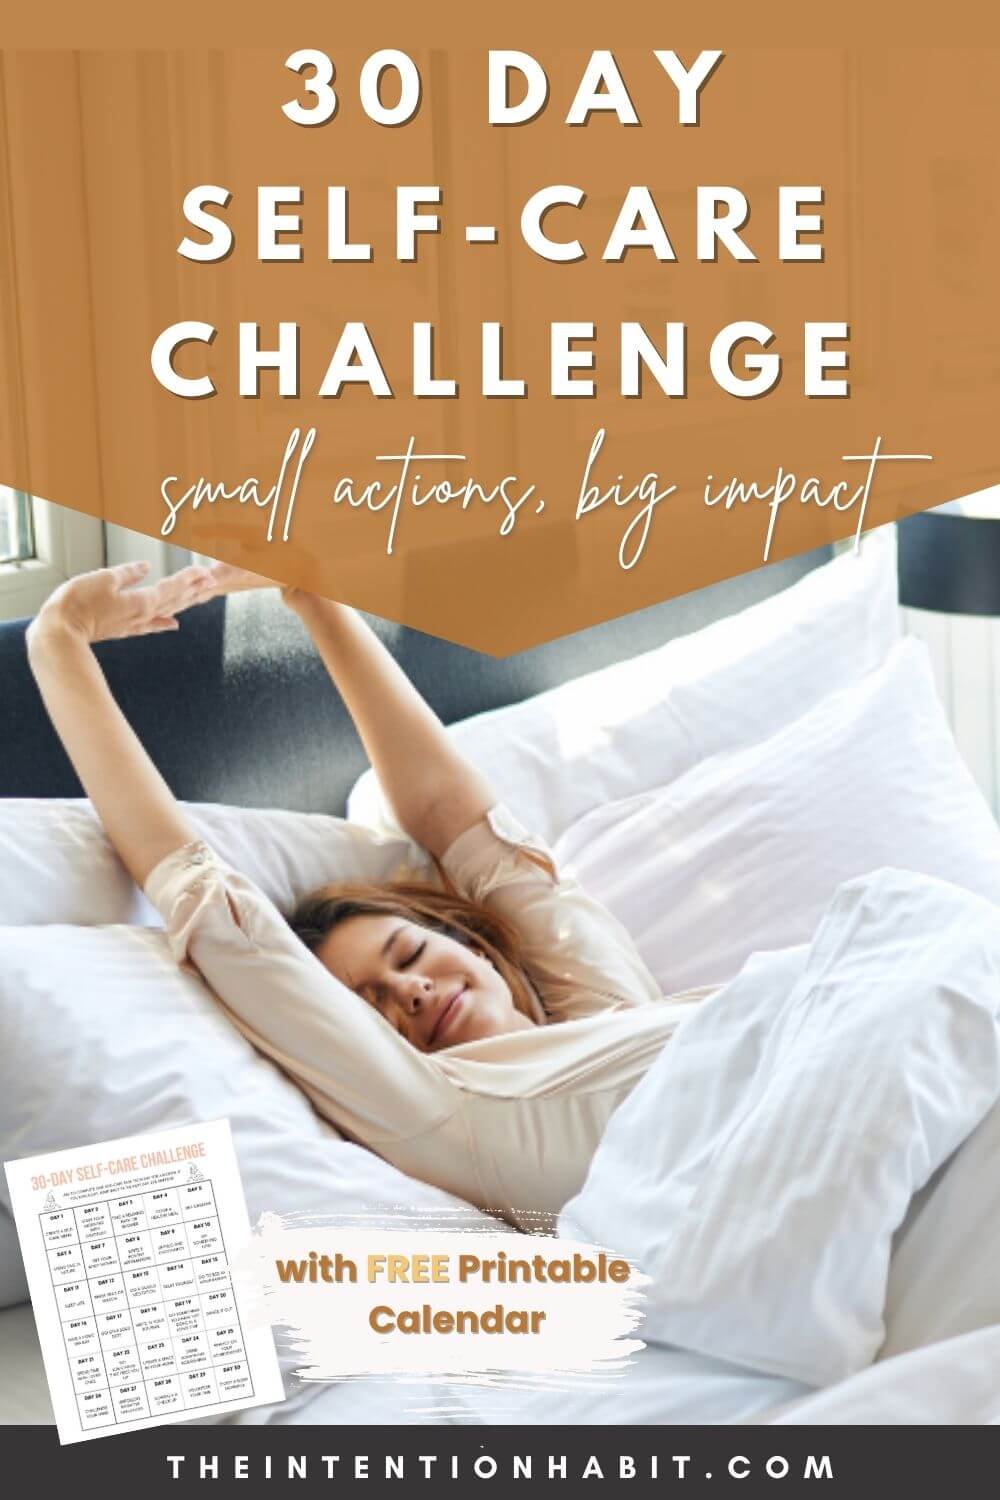 pinterest image - 30 day self care challenge with woman stretching in bed.